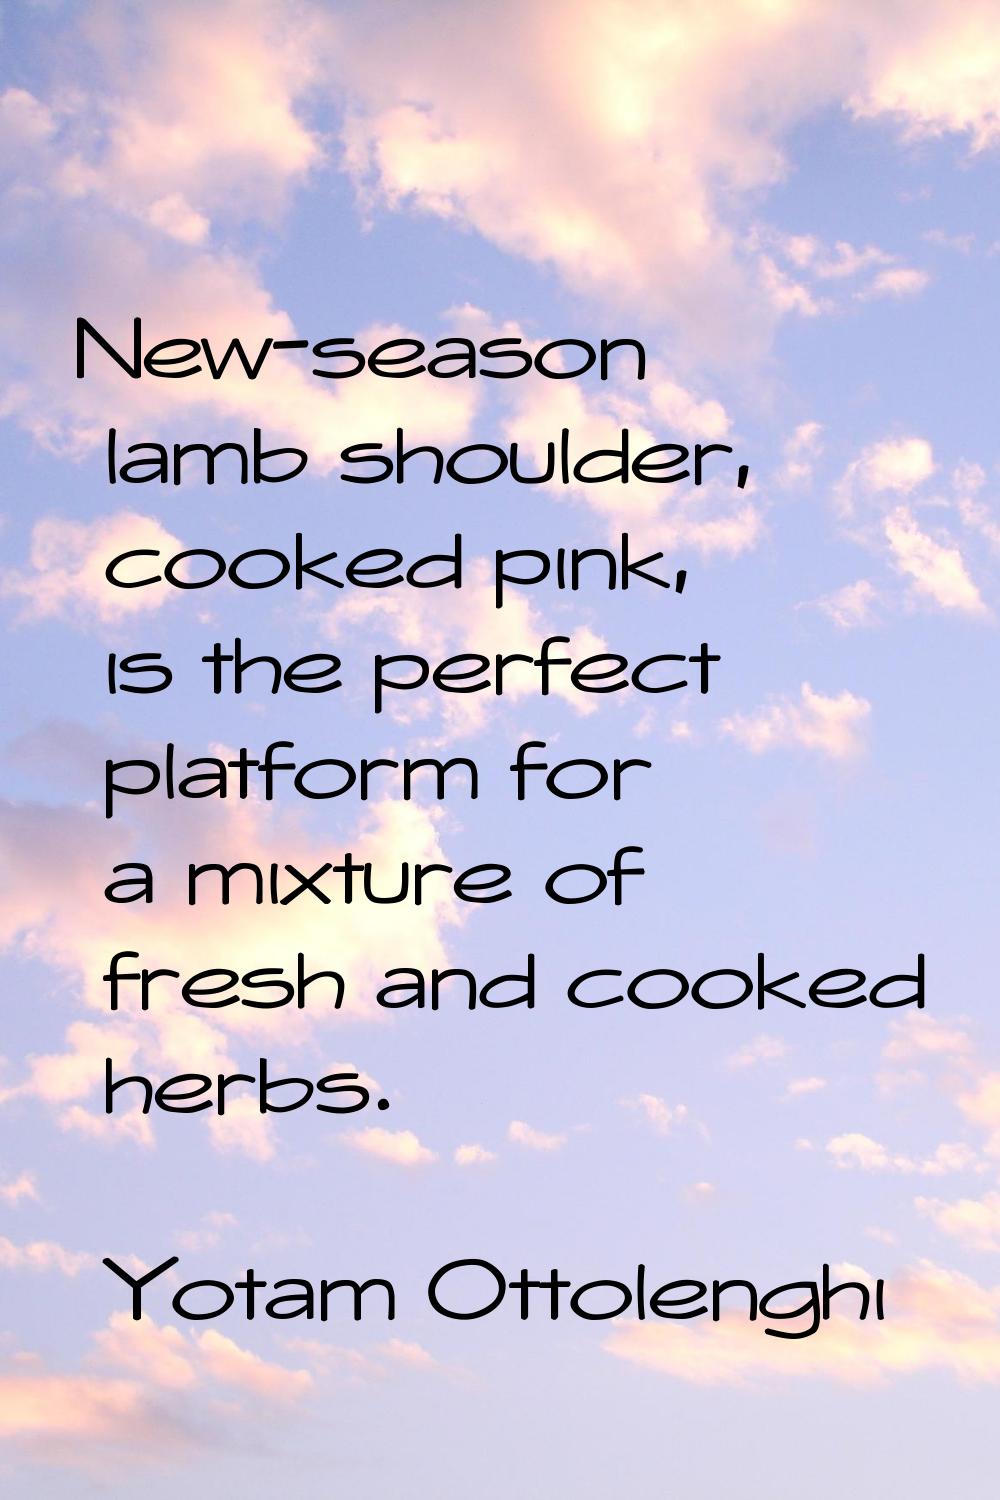 New-season lamb shoulder, cooked pink, is the perfect platform for a mixture of fresh and cooked he